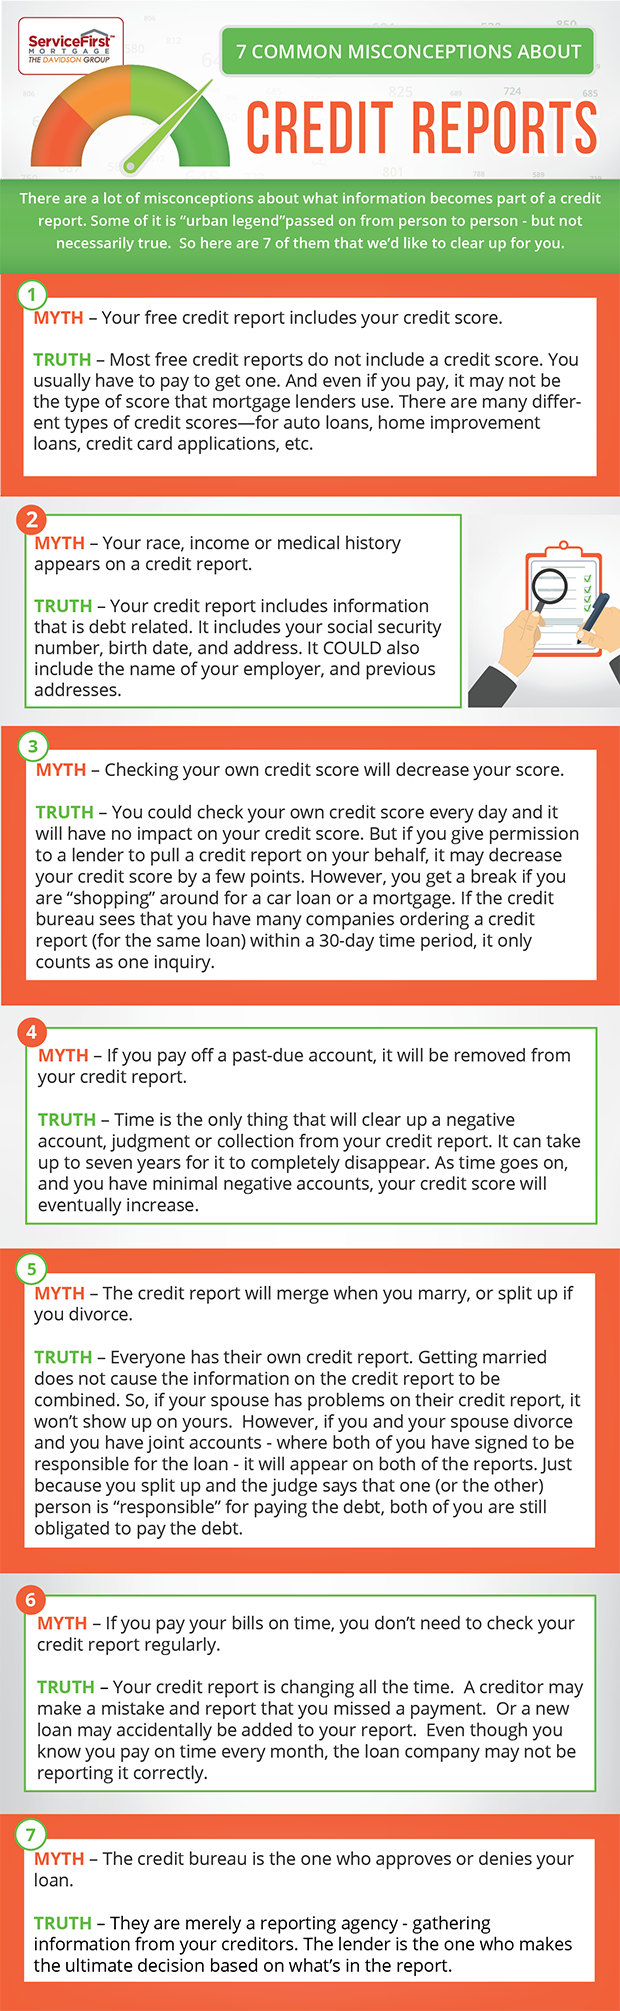 Credit-Report-Myths-Infographic-02.png